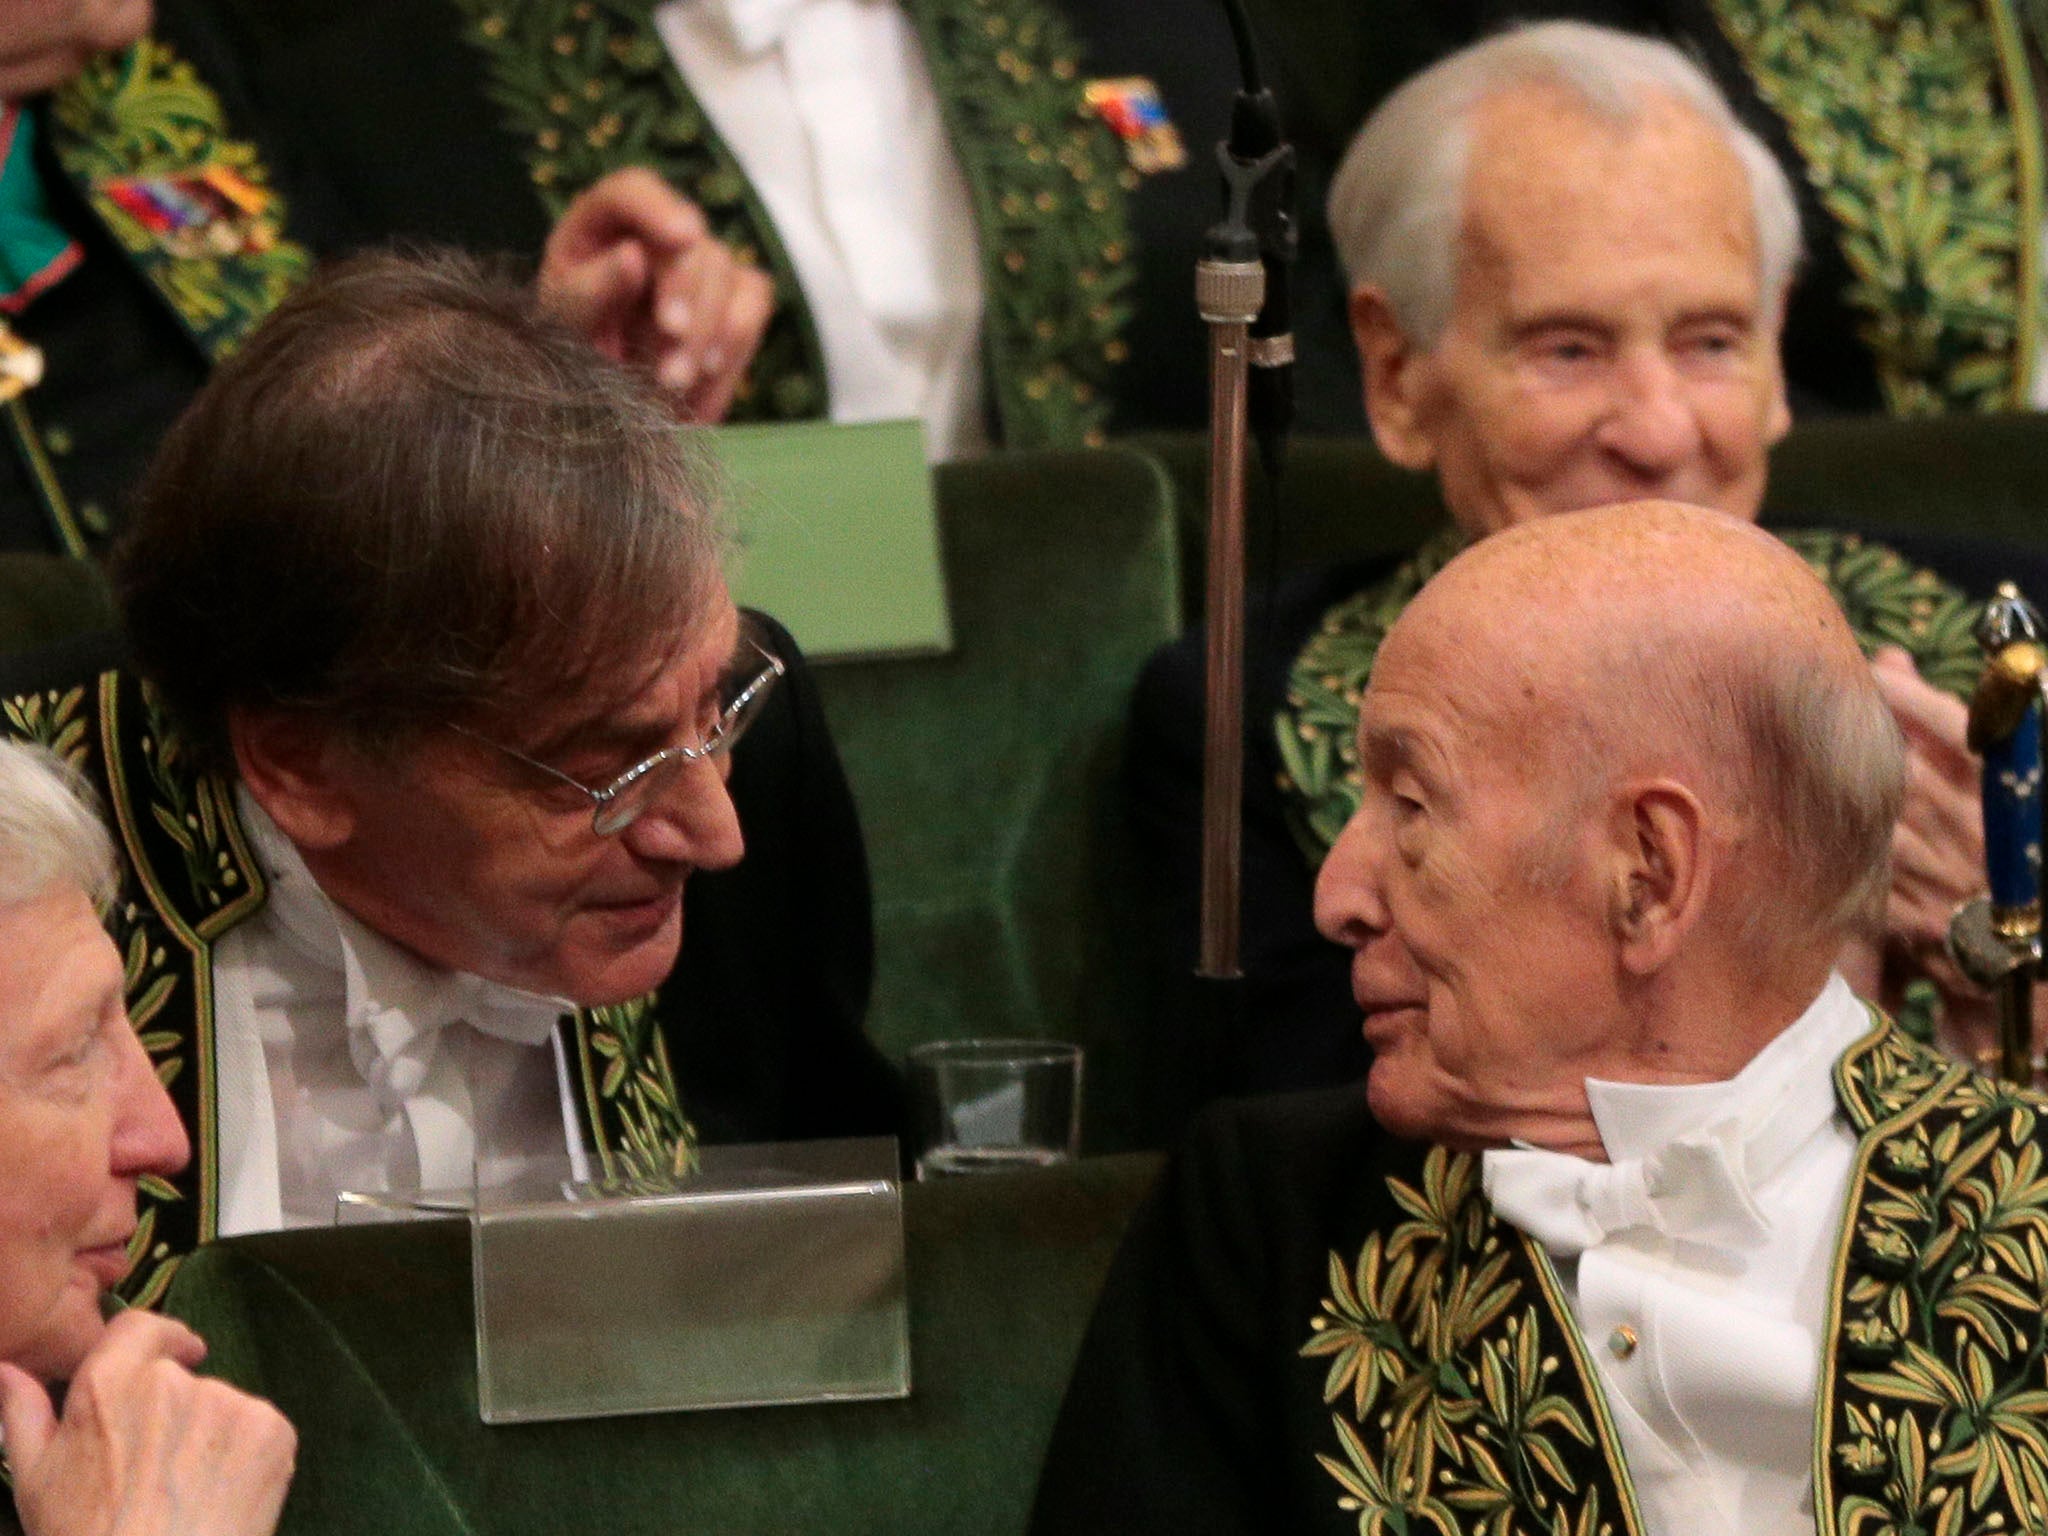 Philosopher Alain Finkielkraut and former president Valery Giscard d’Estaing at a ceremony in 2016 (AFP/Getty)